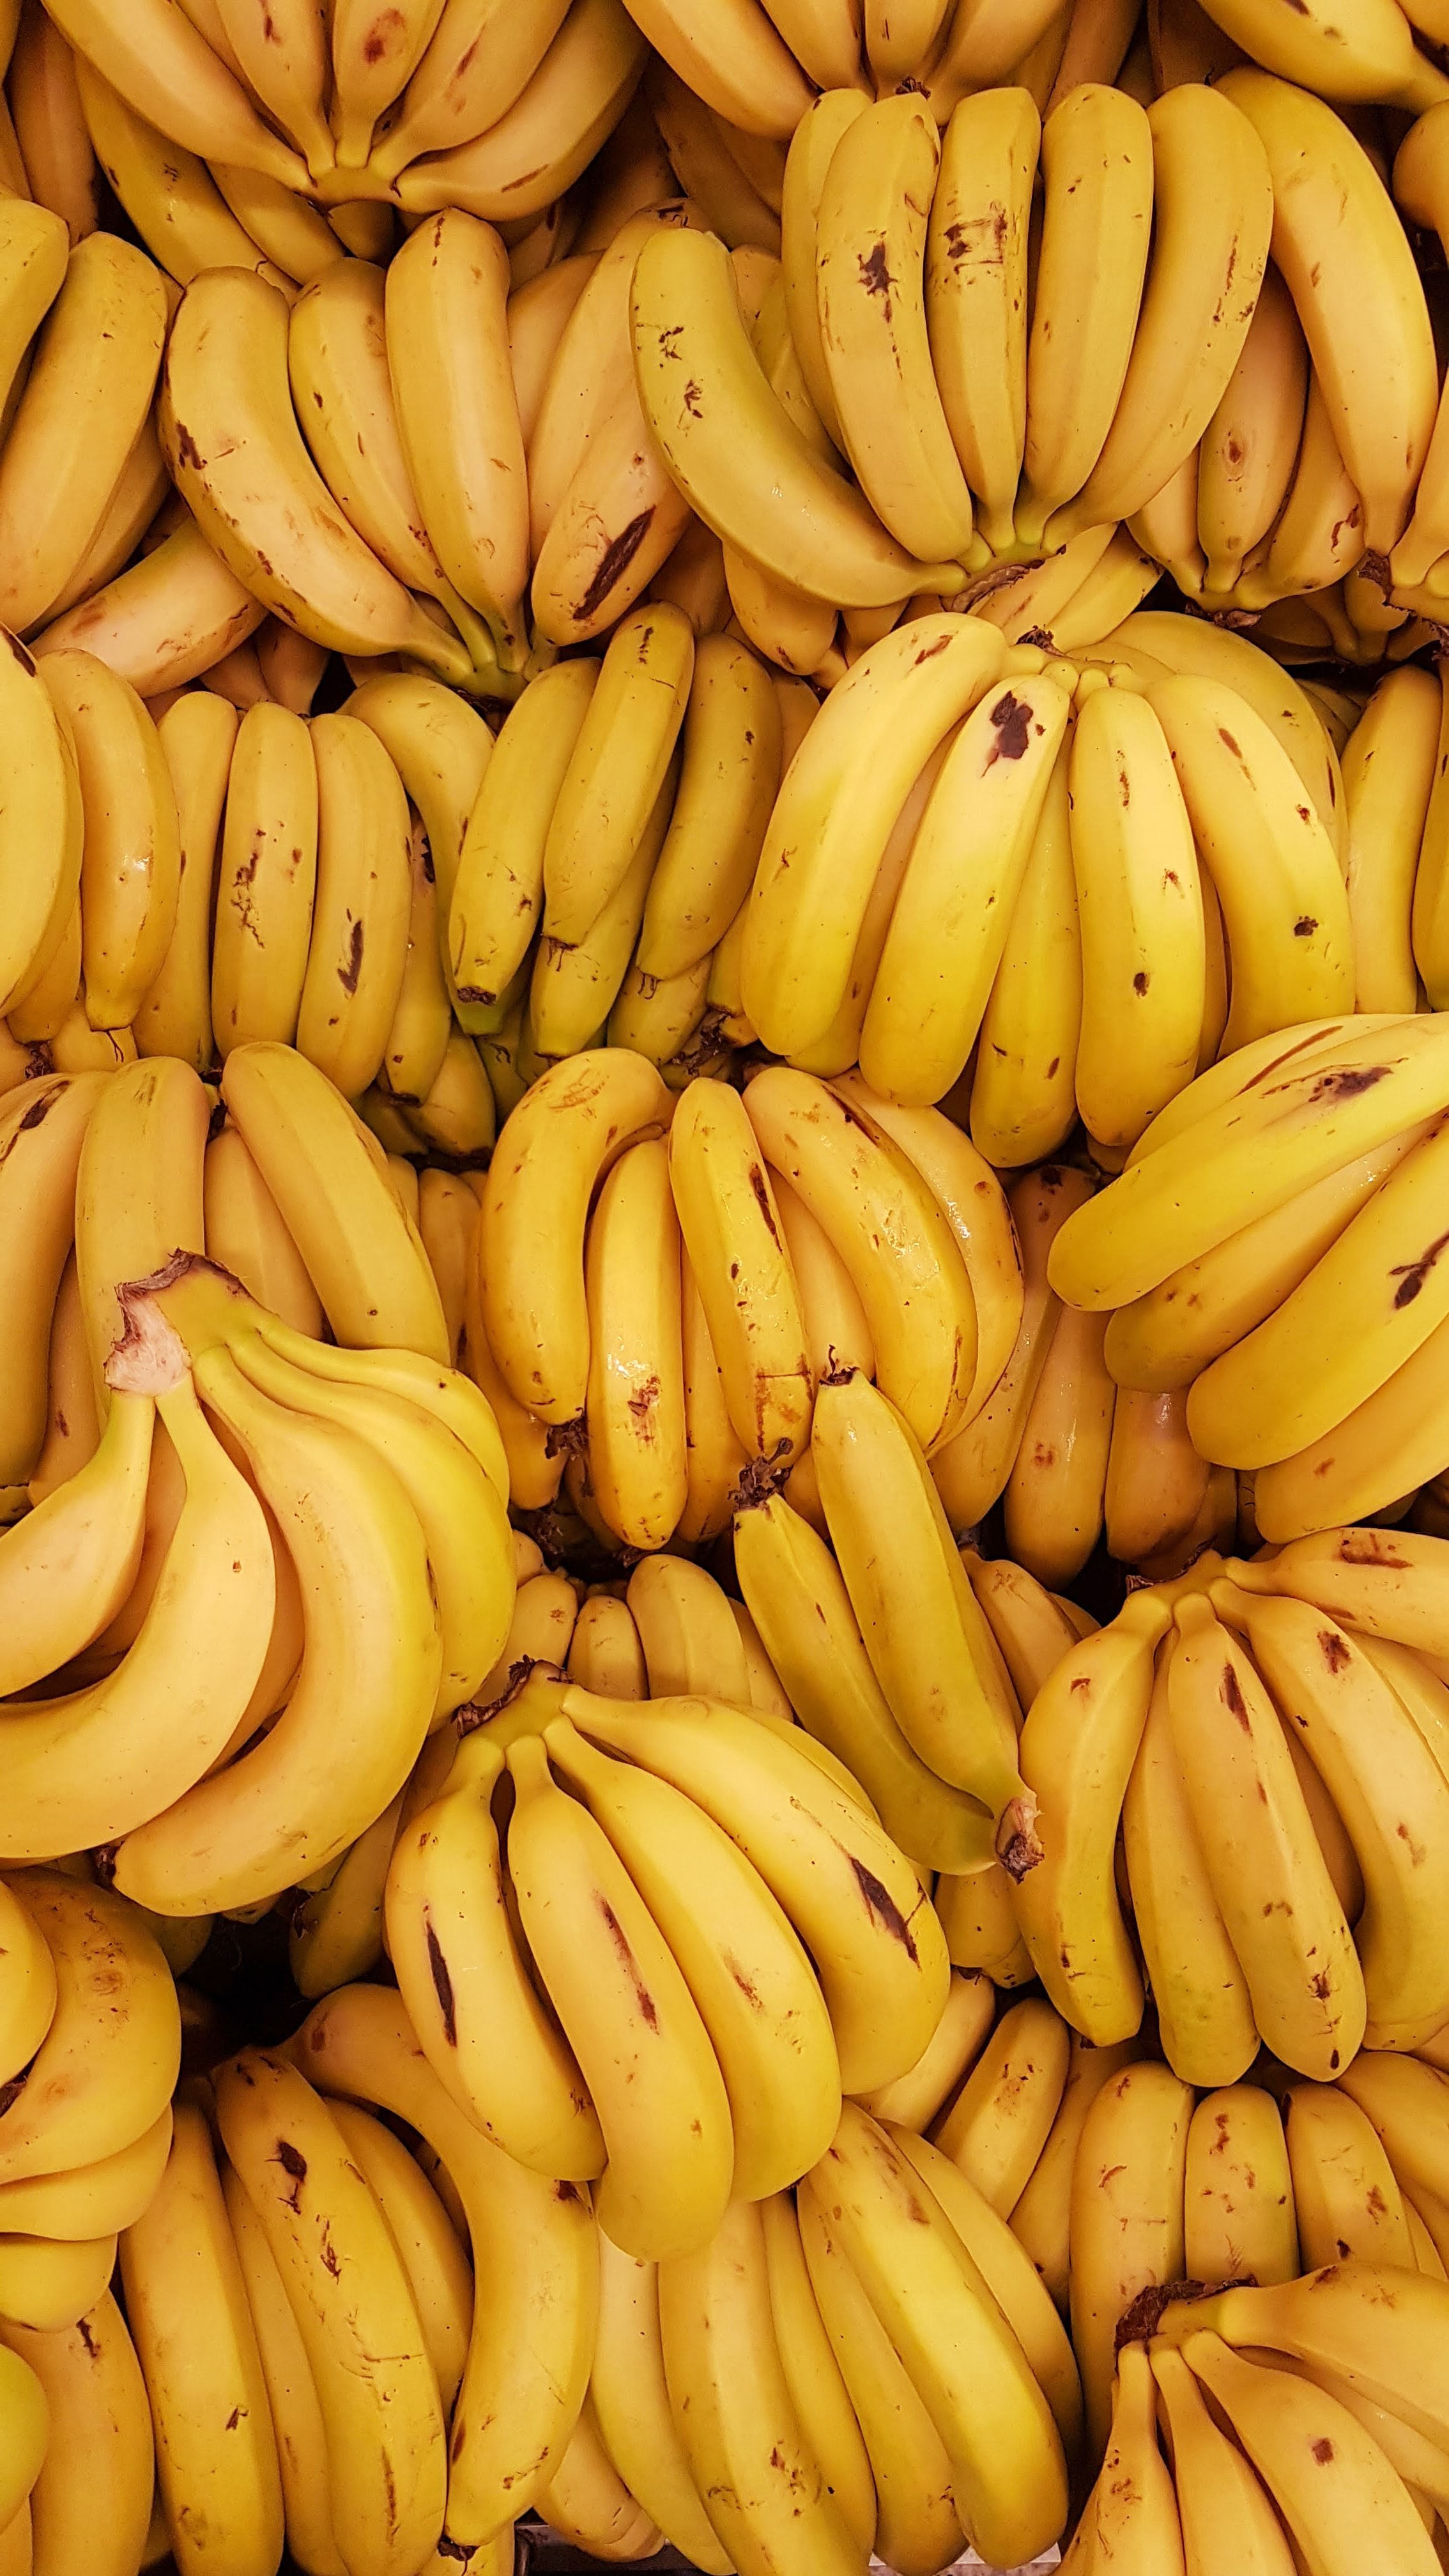 New Lock Screen Wallpapers fruits, food, bananas, yellow, bunches, clusters